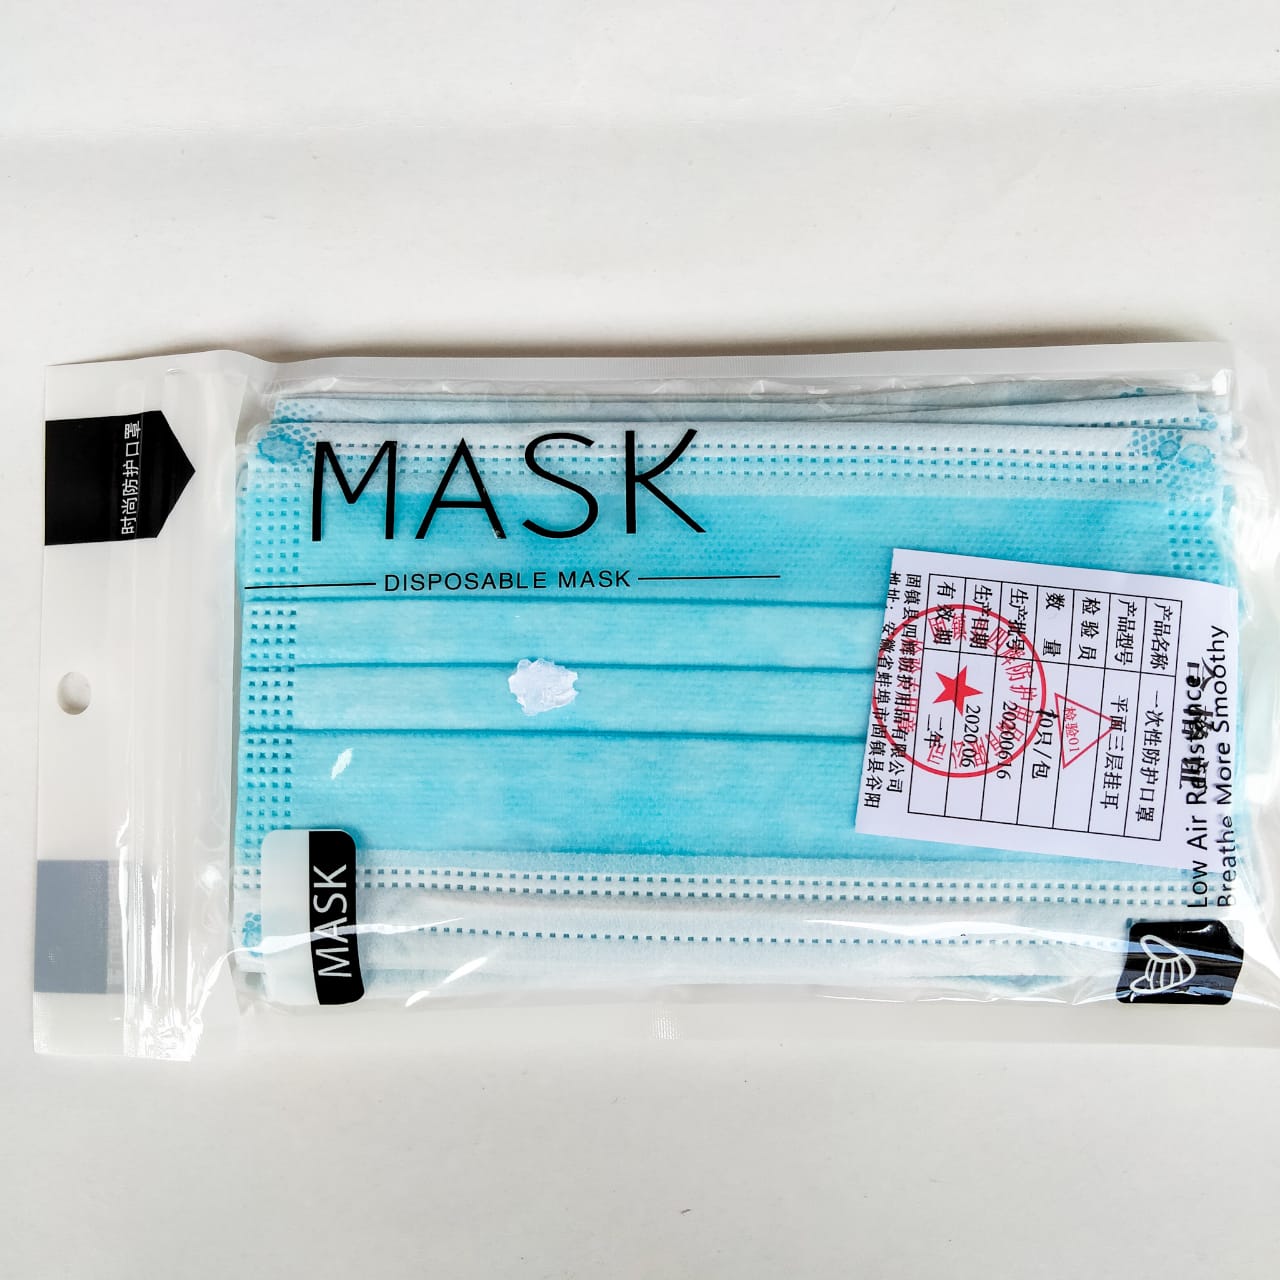 Masker Medis 3 Ply Disposable 1 Bungkus Isi 10